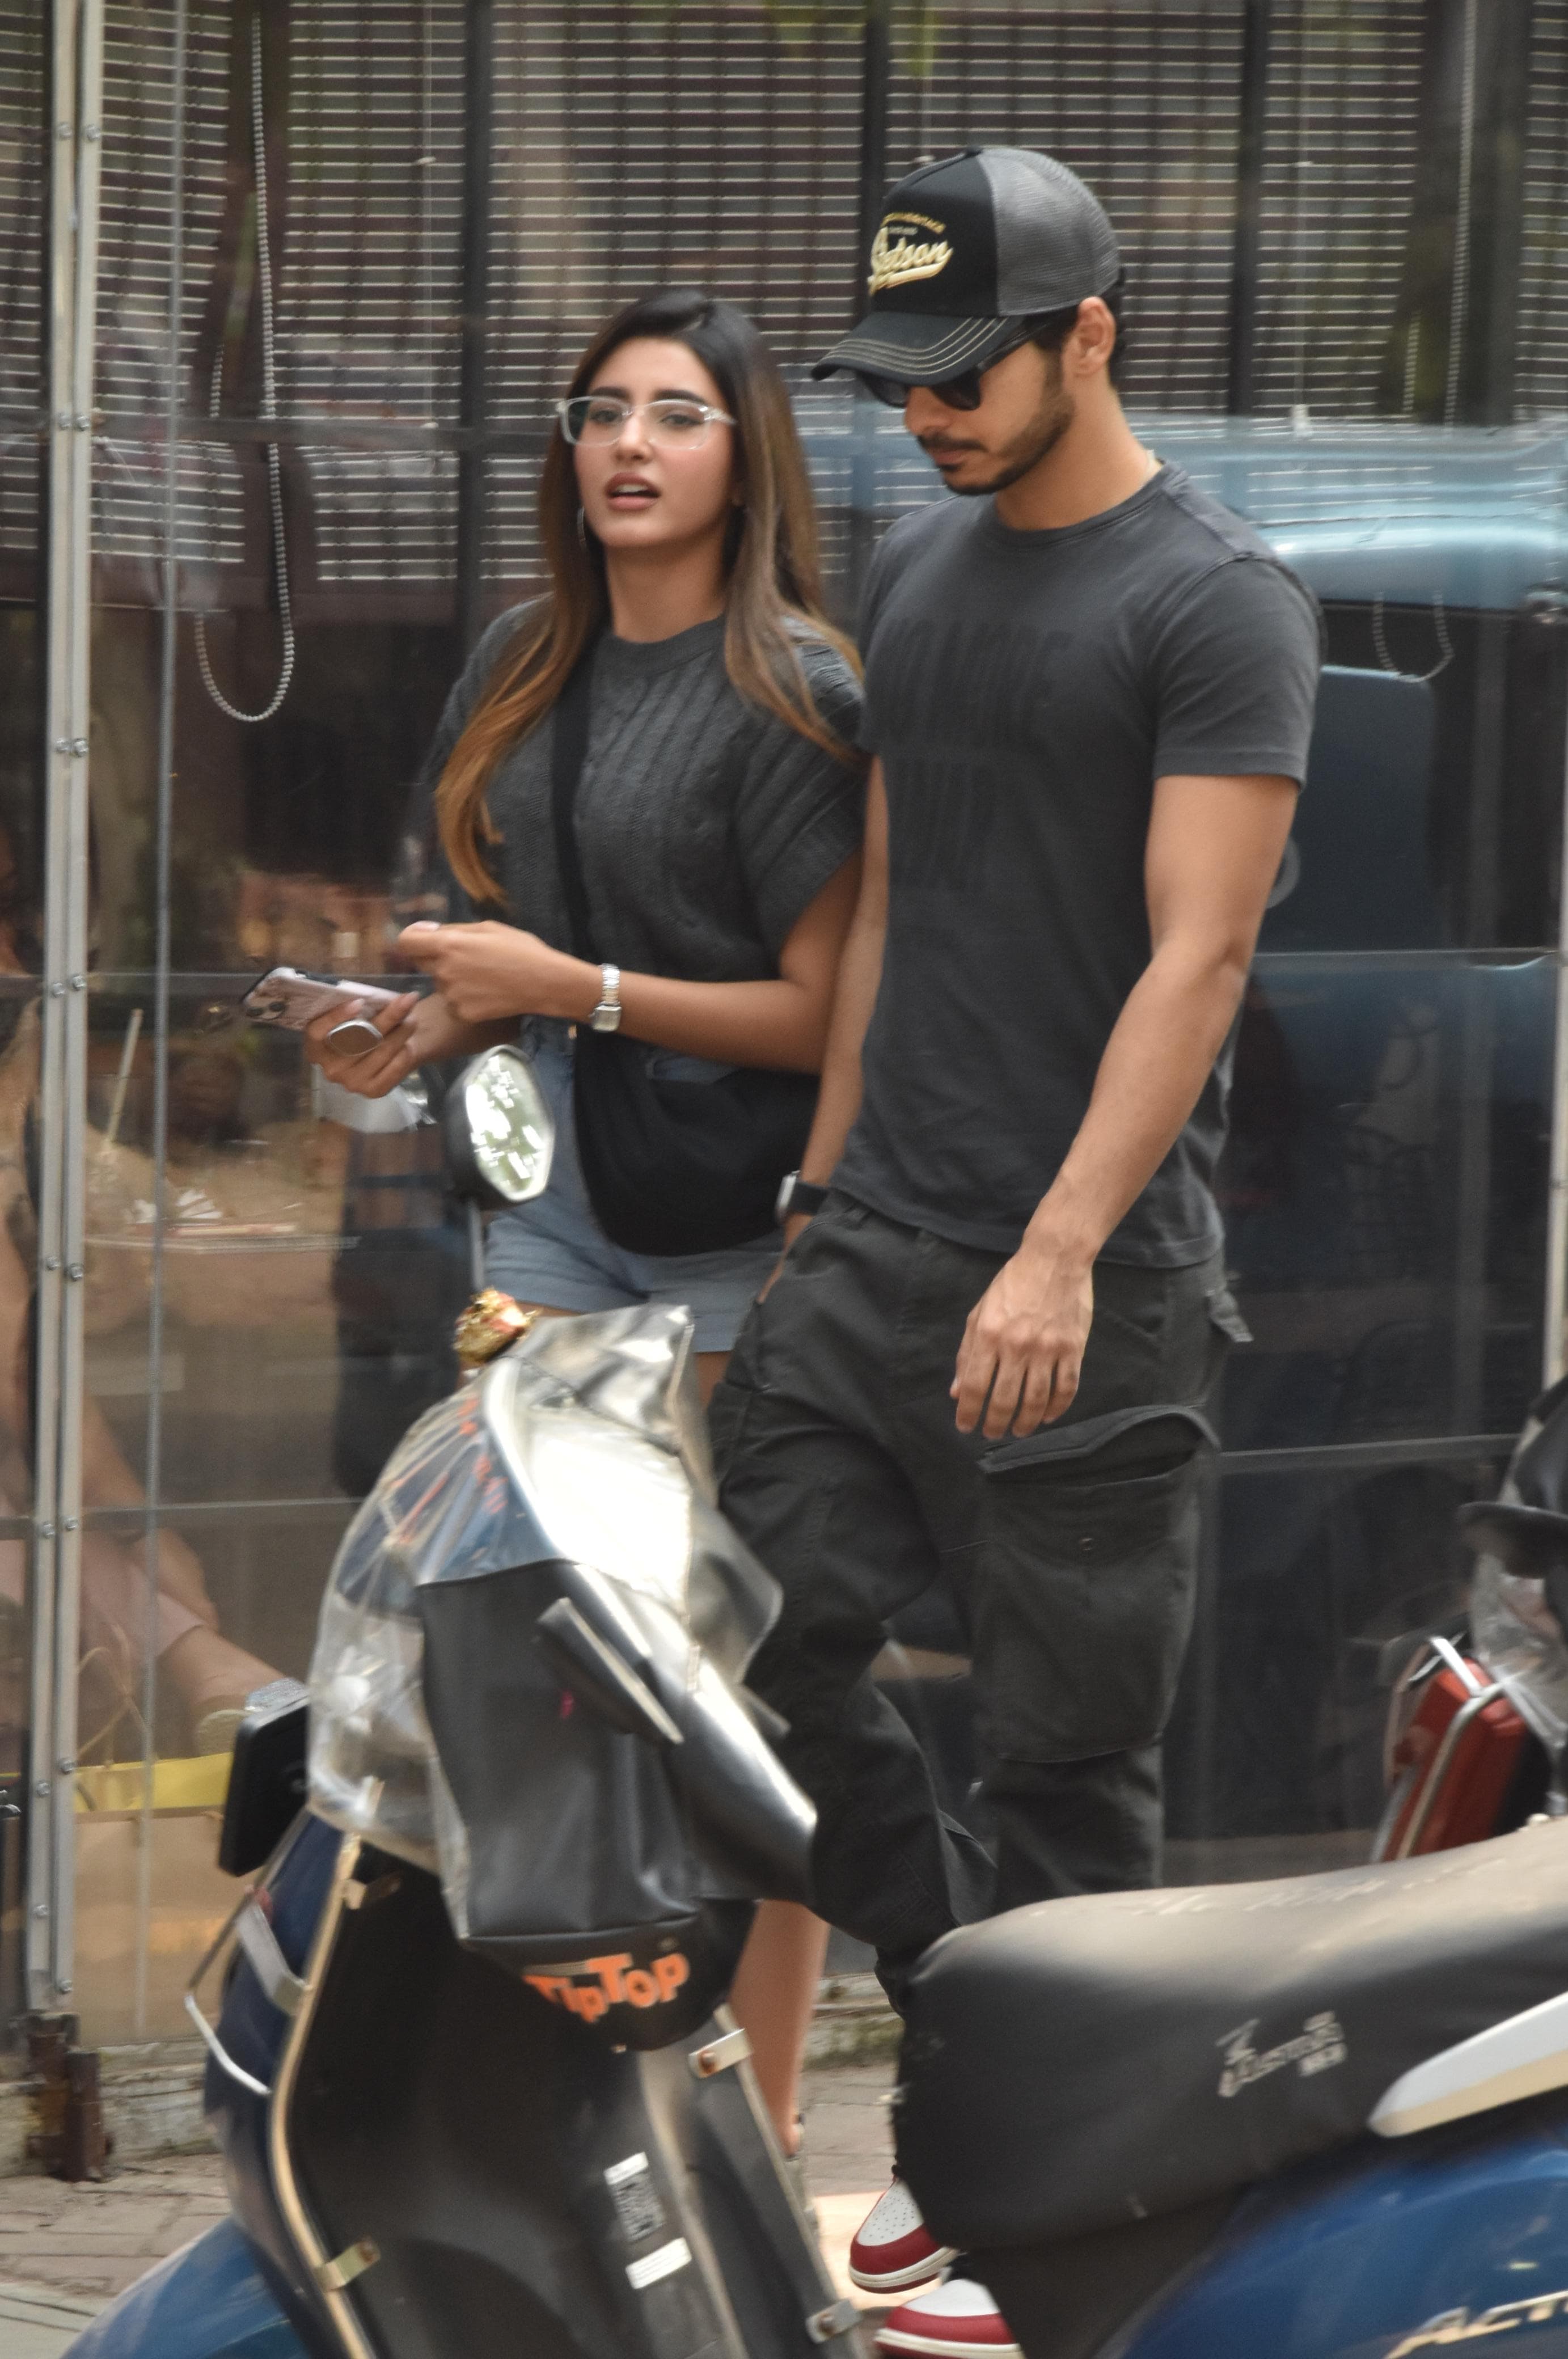 Ishan Khattar was spotted with a friend taking a stroll